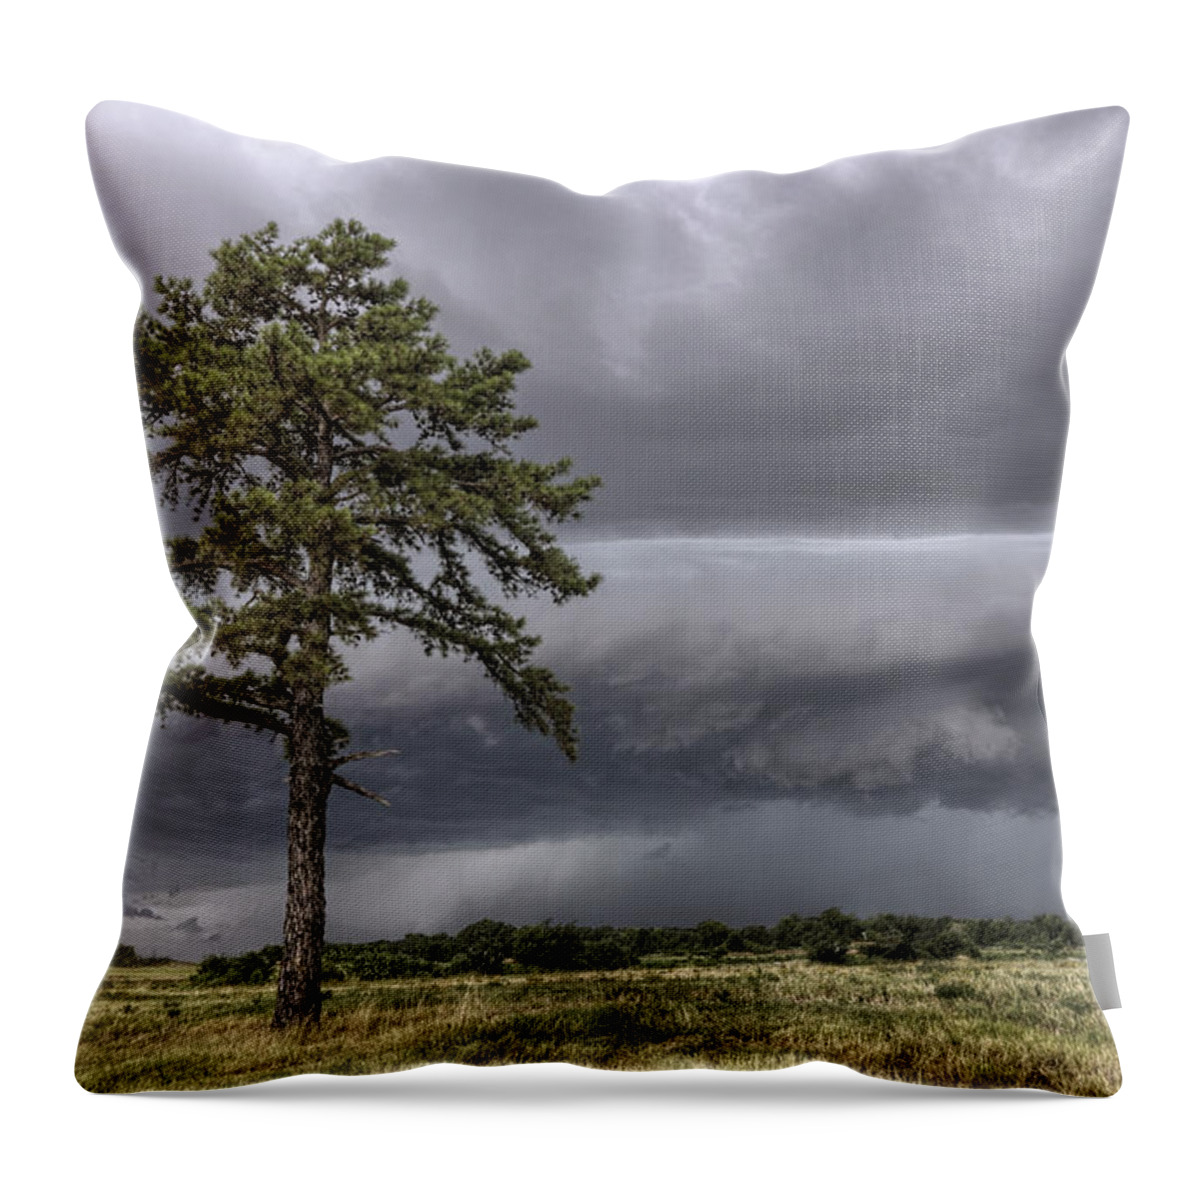 Thunderstorm Throw Pillow featuring the photograph The Thunder Rolls - Storm - Pine Tree by Jason Politte